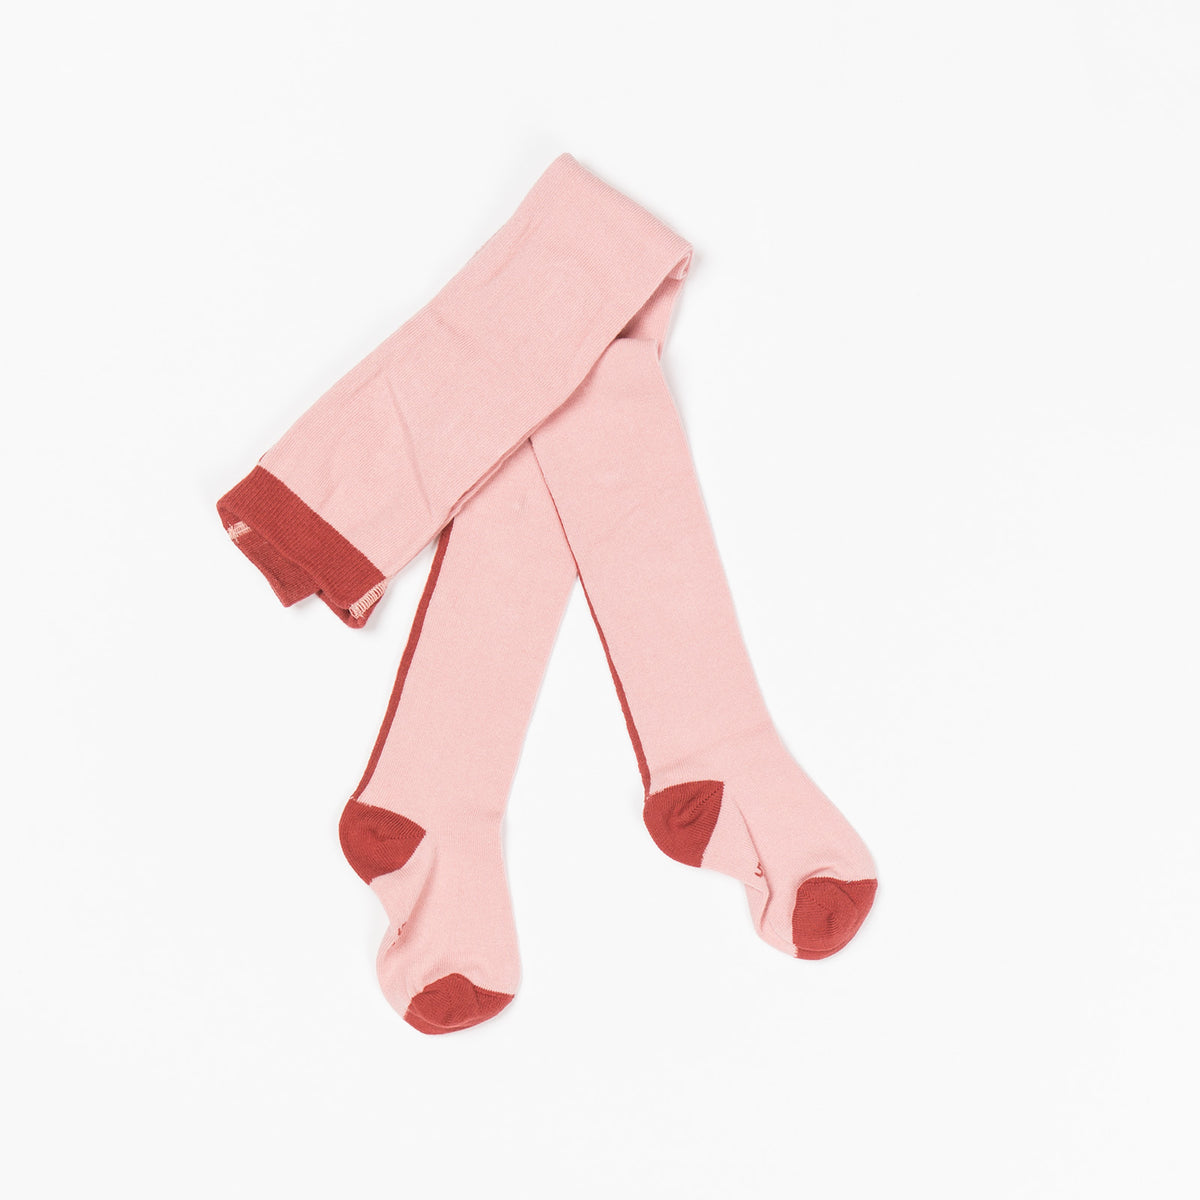 AlbaBabY - Thea Tights Rose Tan